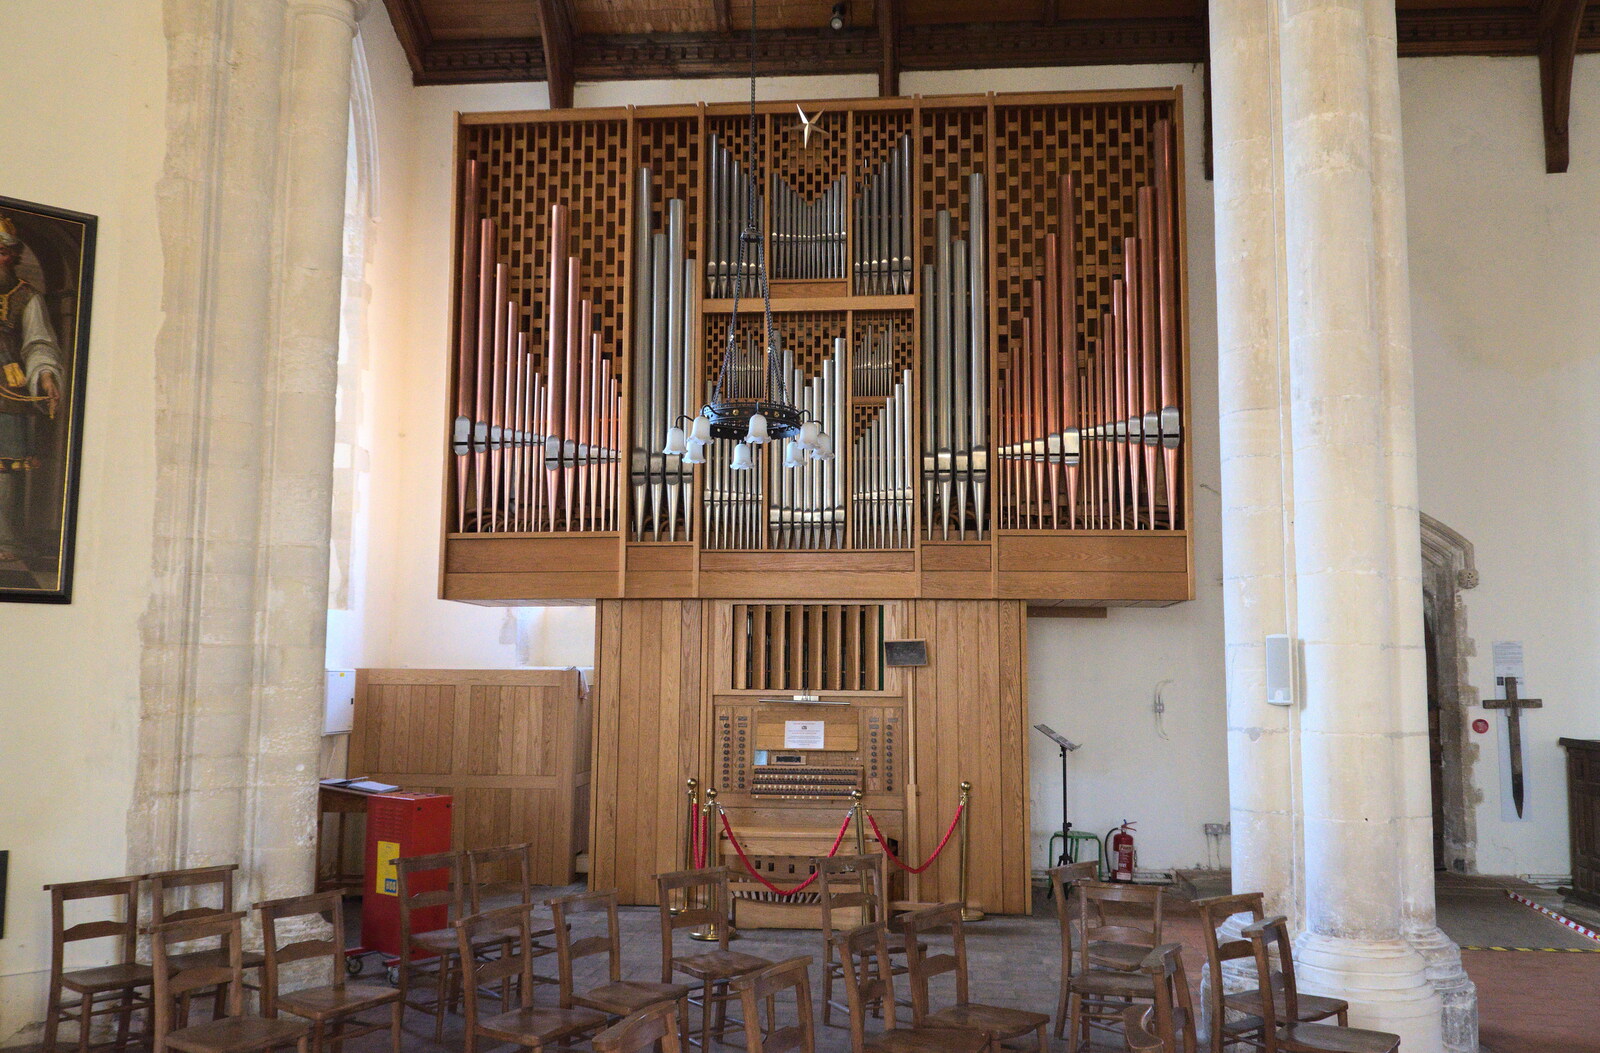 The impressive Peter Collins organ from A Trip to Orford Castle, Orford, Suffolk - 26th February 2022